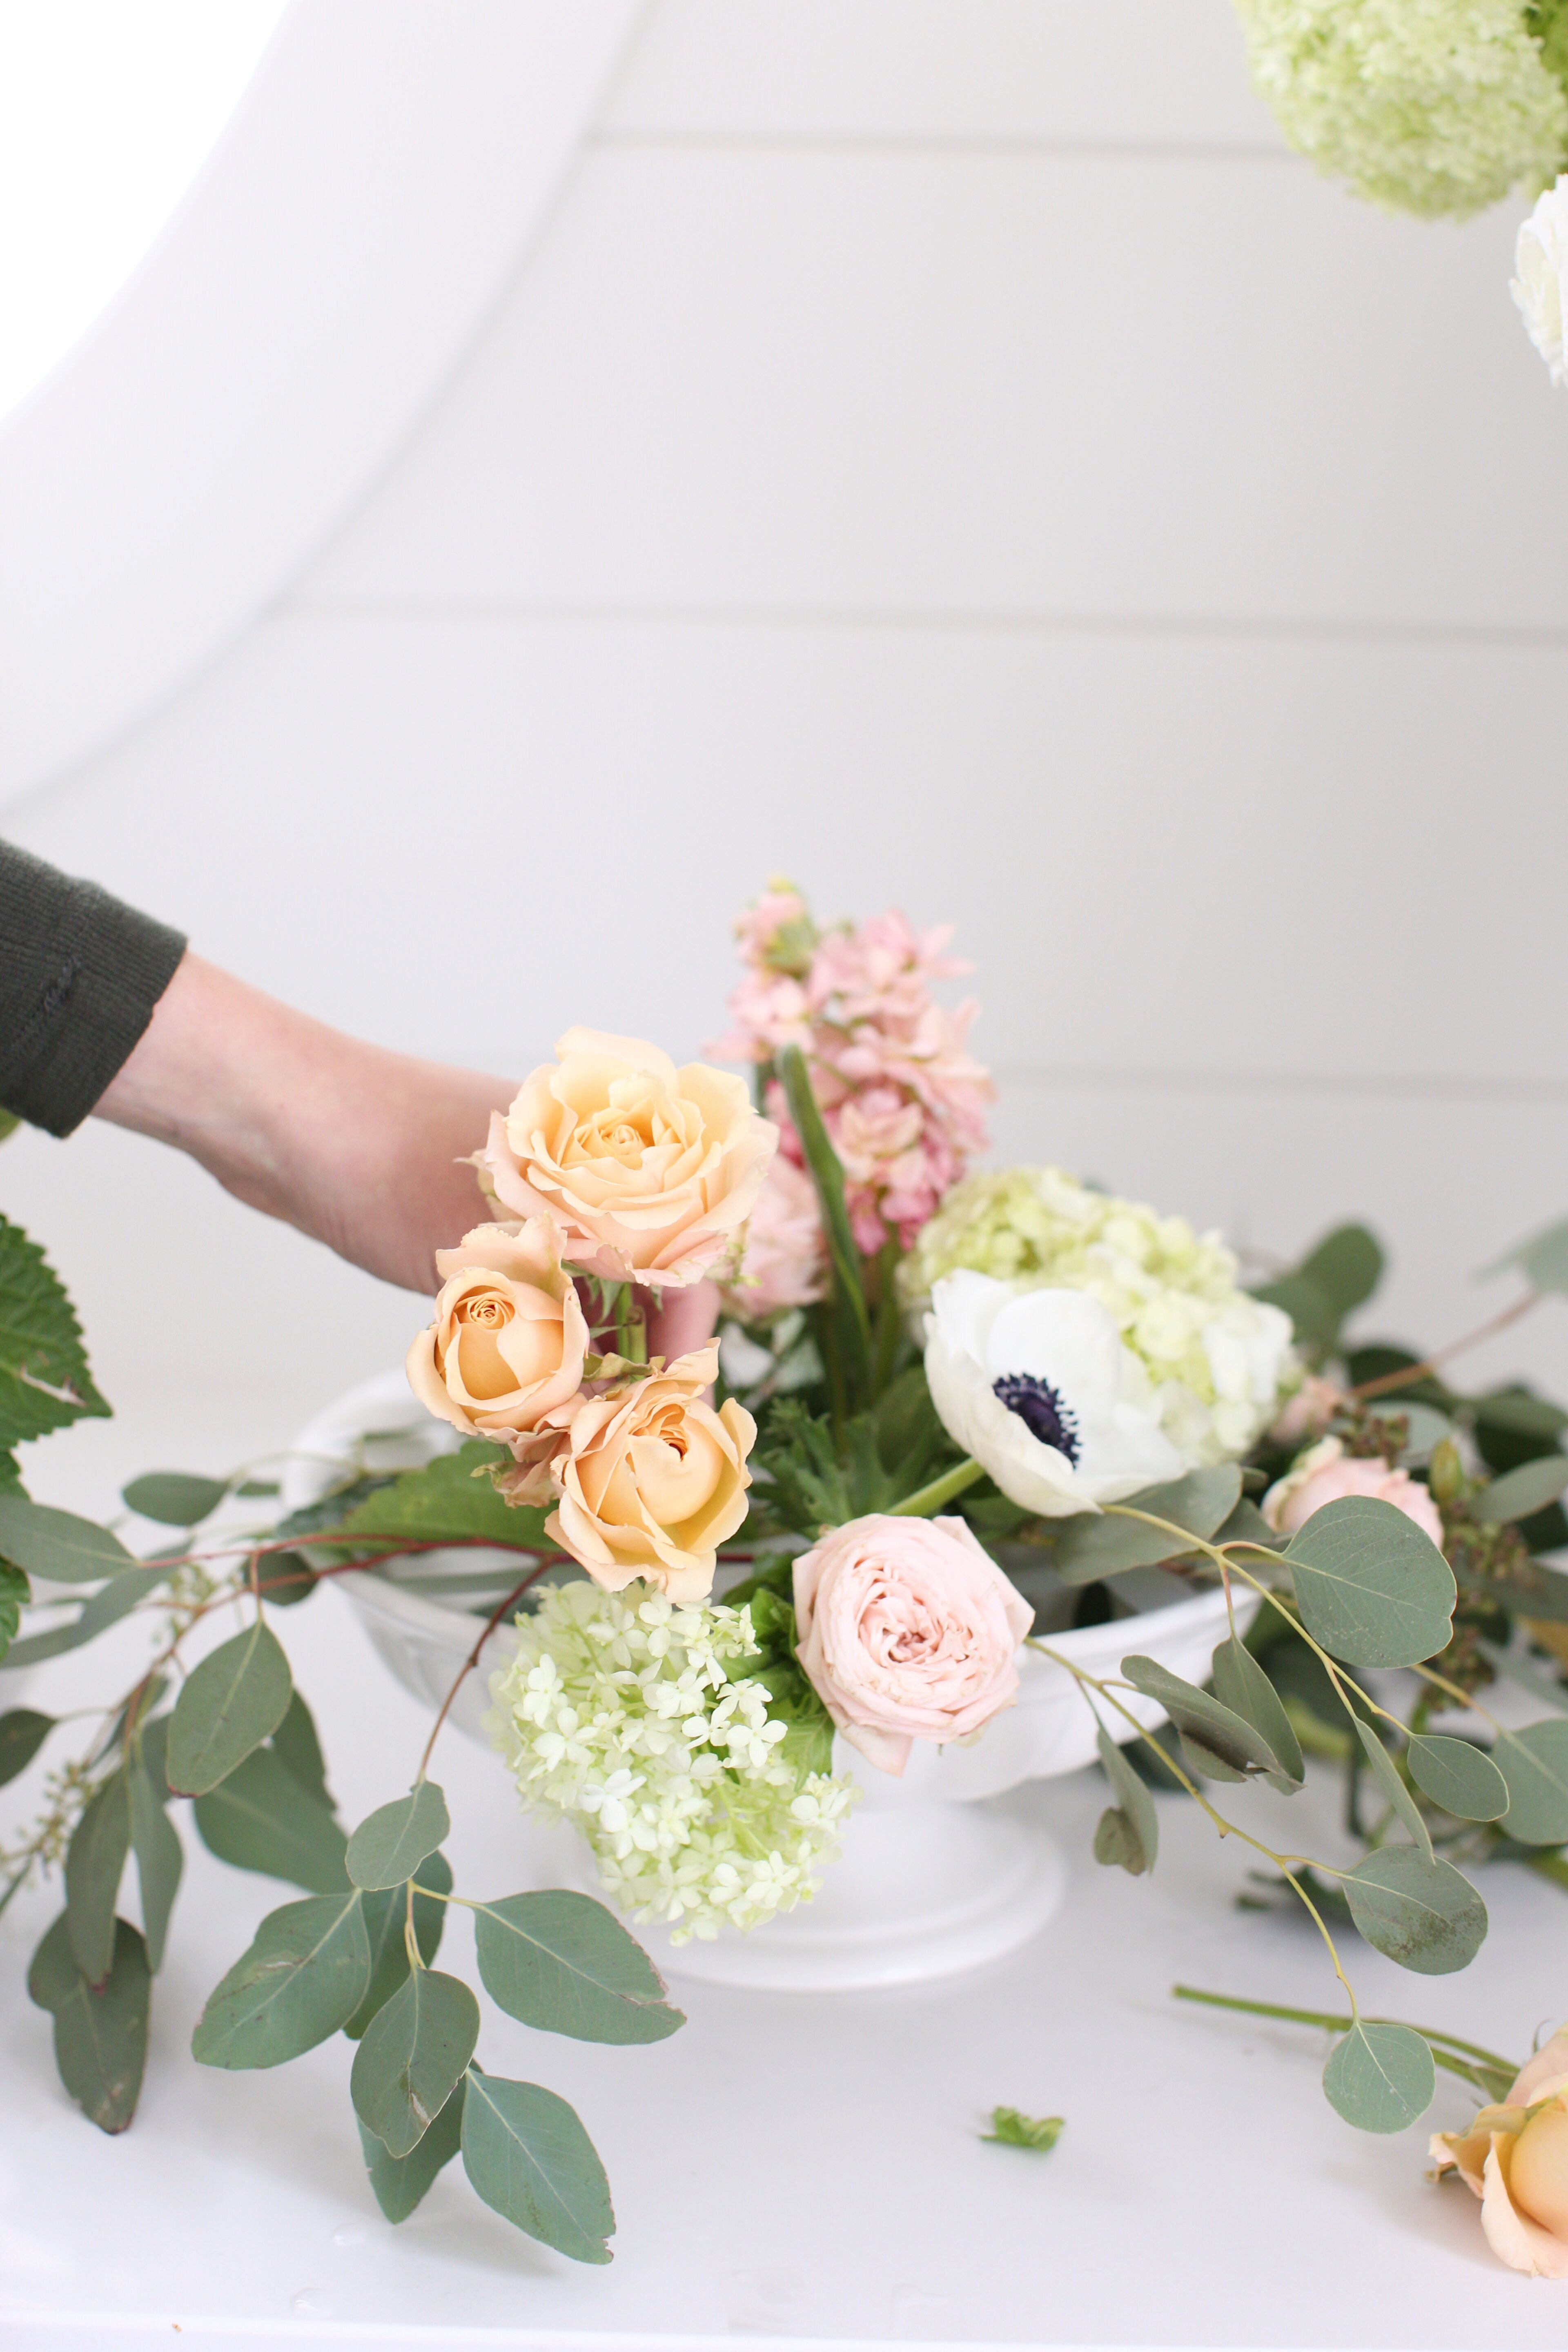 The perfect flower arrangement tutorial for the dinner table using any regular bowl with this essential floral hack from Tori at Fraiche